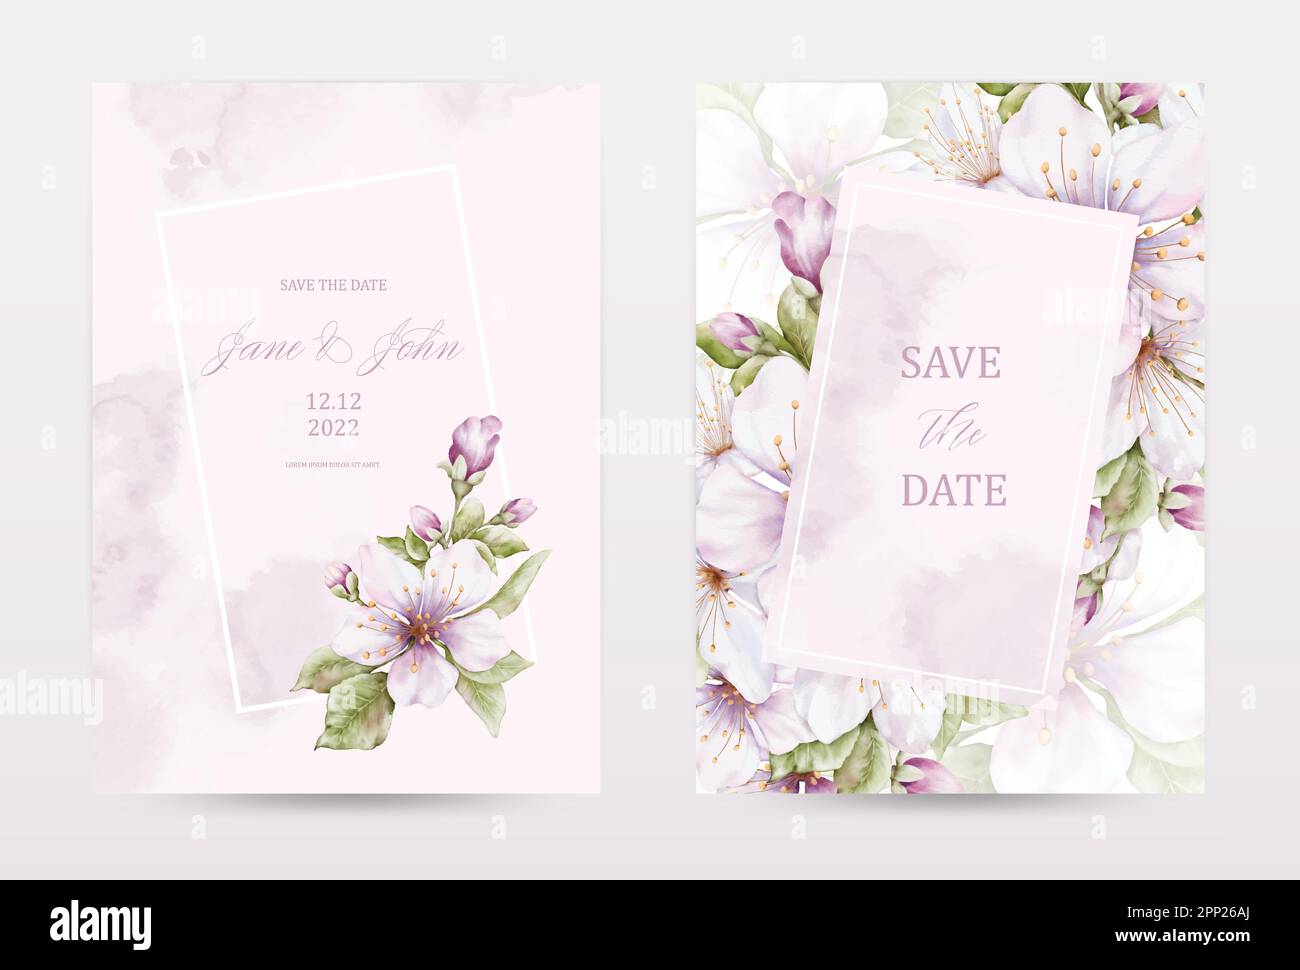 Watercolor cherry blossoms blooming invitation template cards set. Pink collection watercolor flowers vector is suitable for Wedding invitations, save Stock Vector